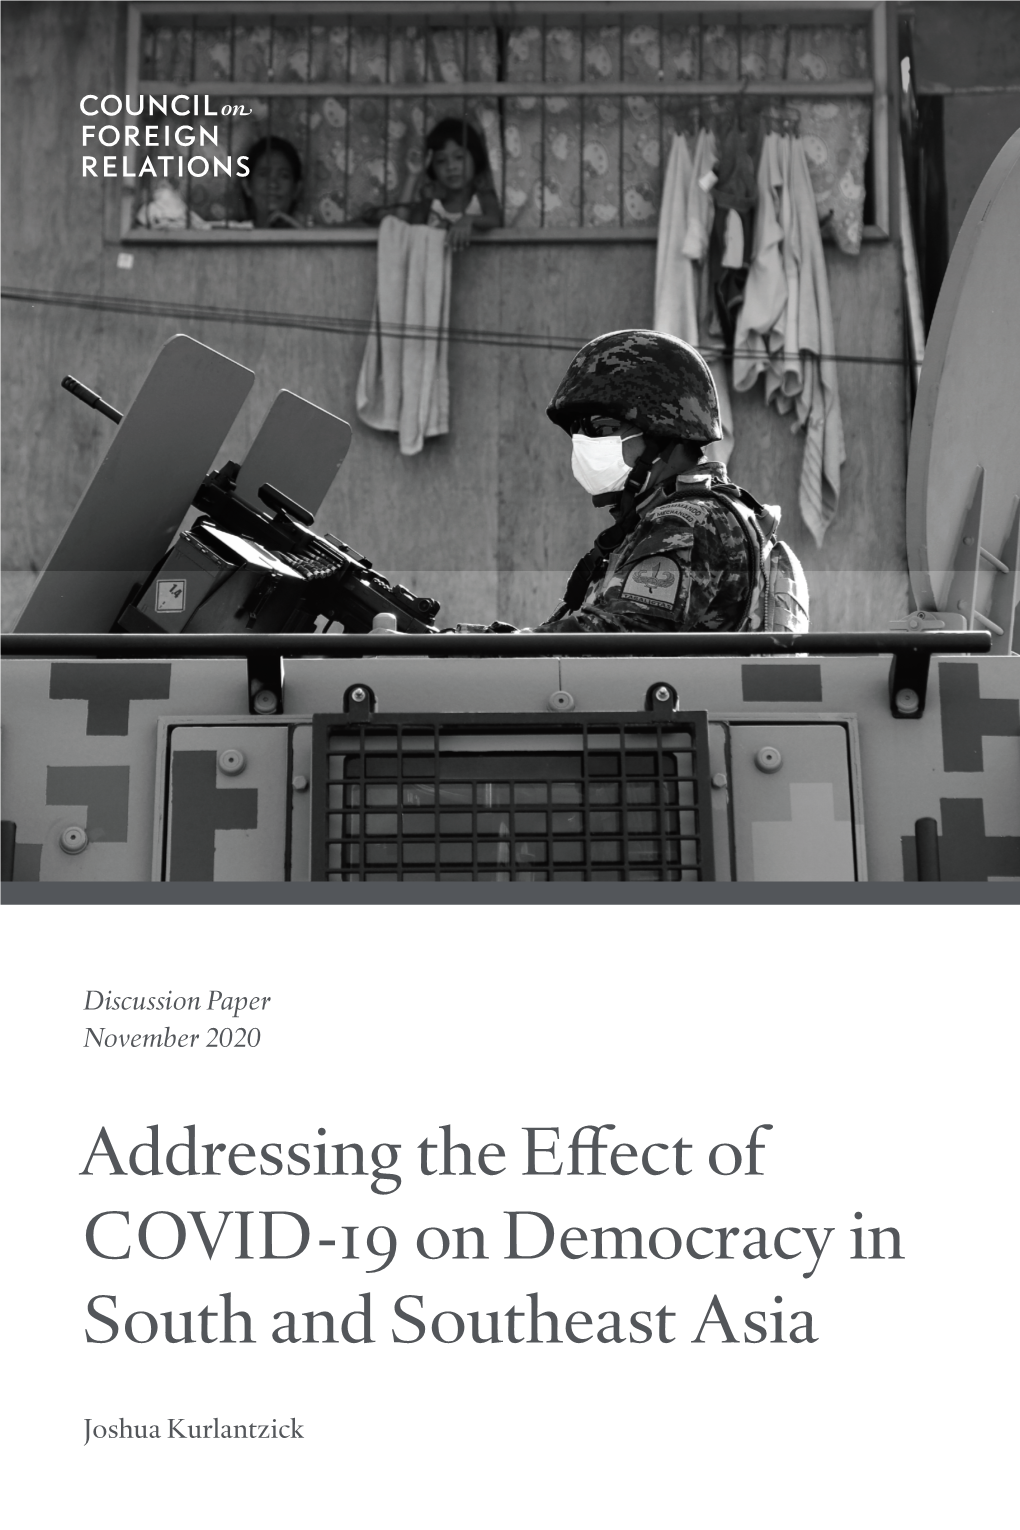 Addressing the Effect of COVID-19 on Democracy in South and Southeast Asia